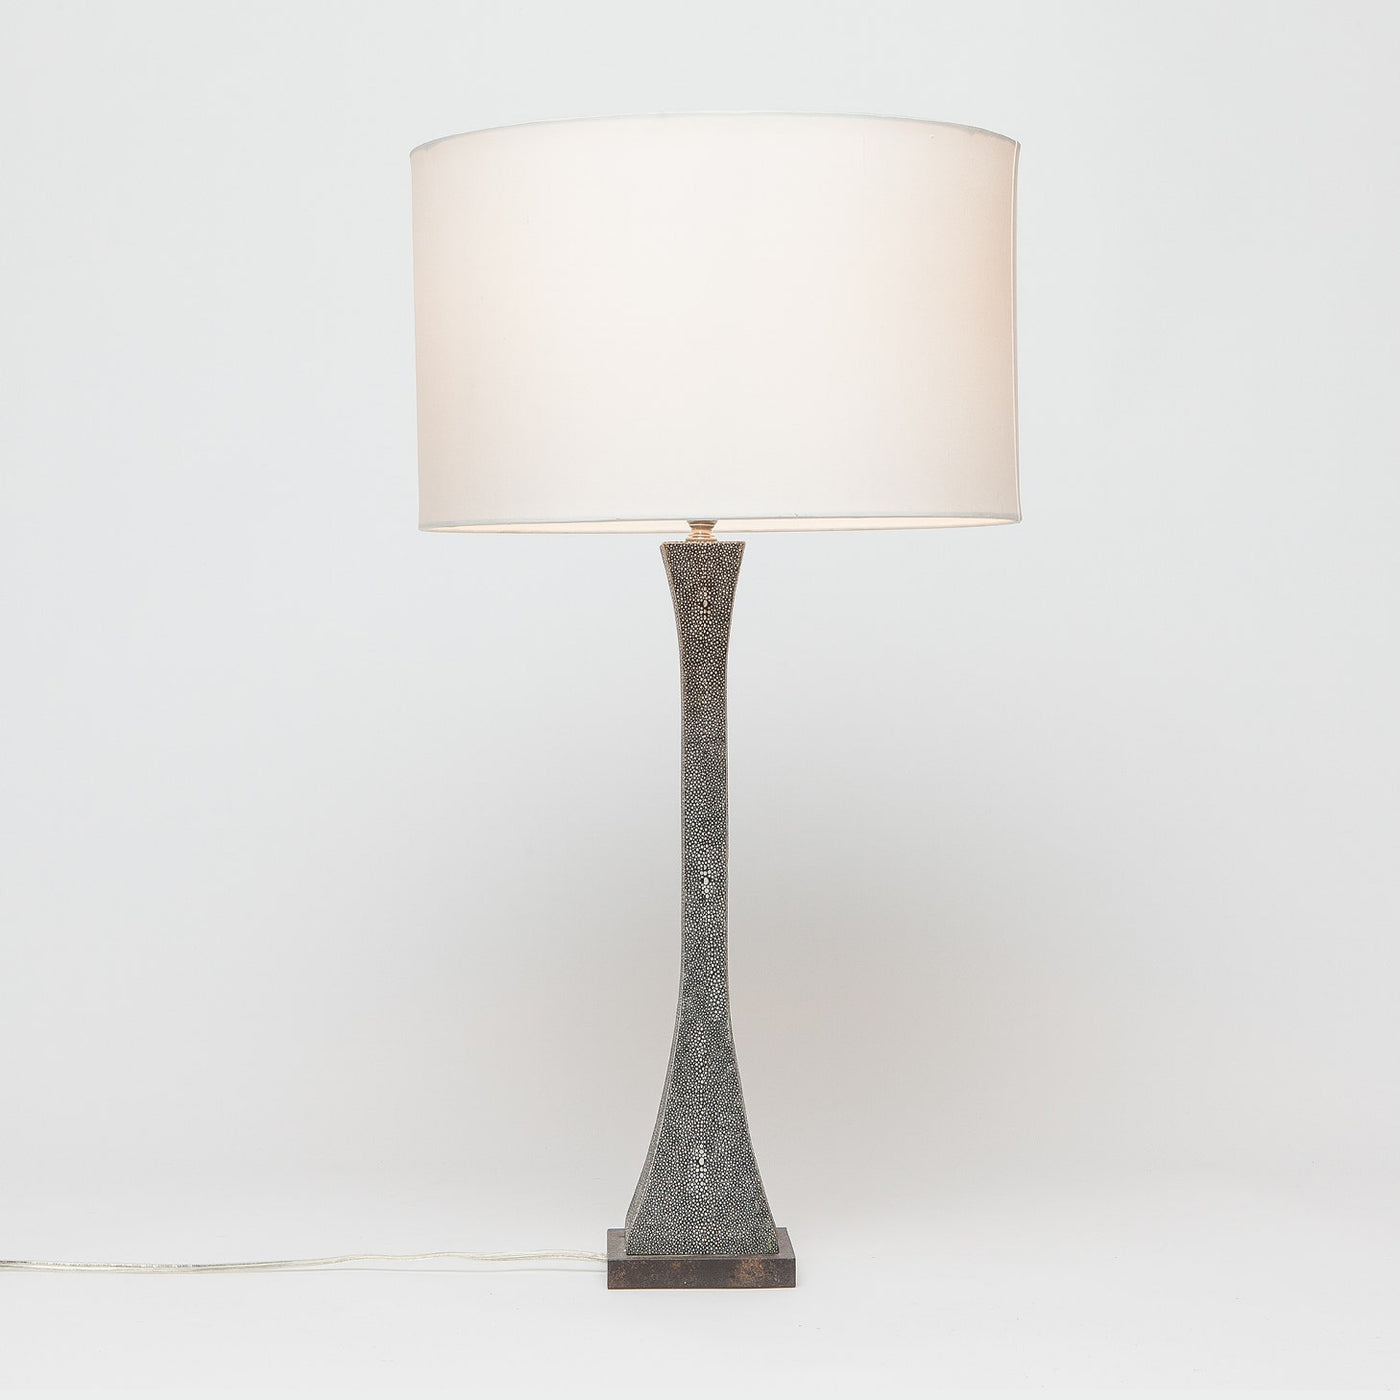 TABLE LAMP TAPERED COOL GRAY FAUX SHAGREEN